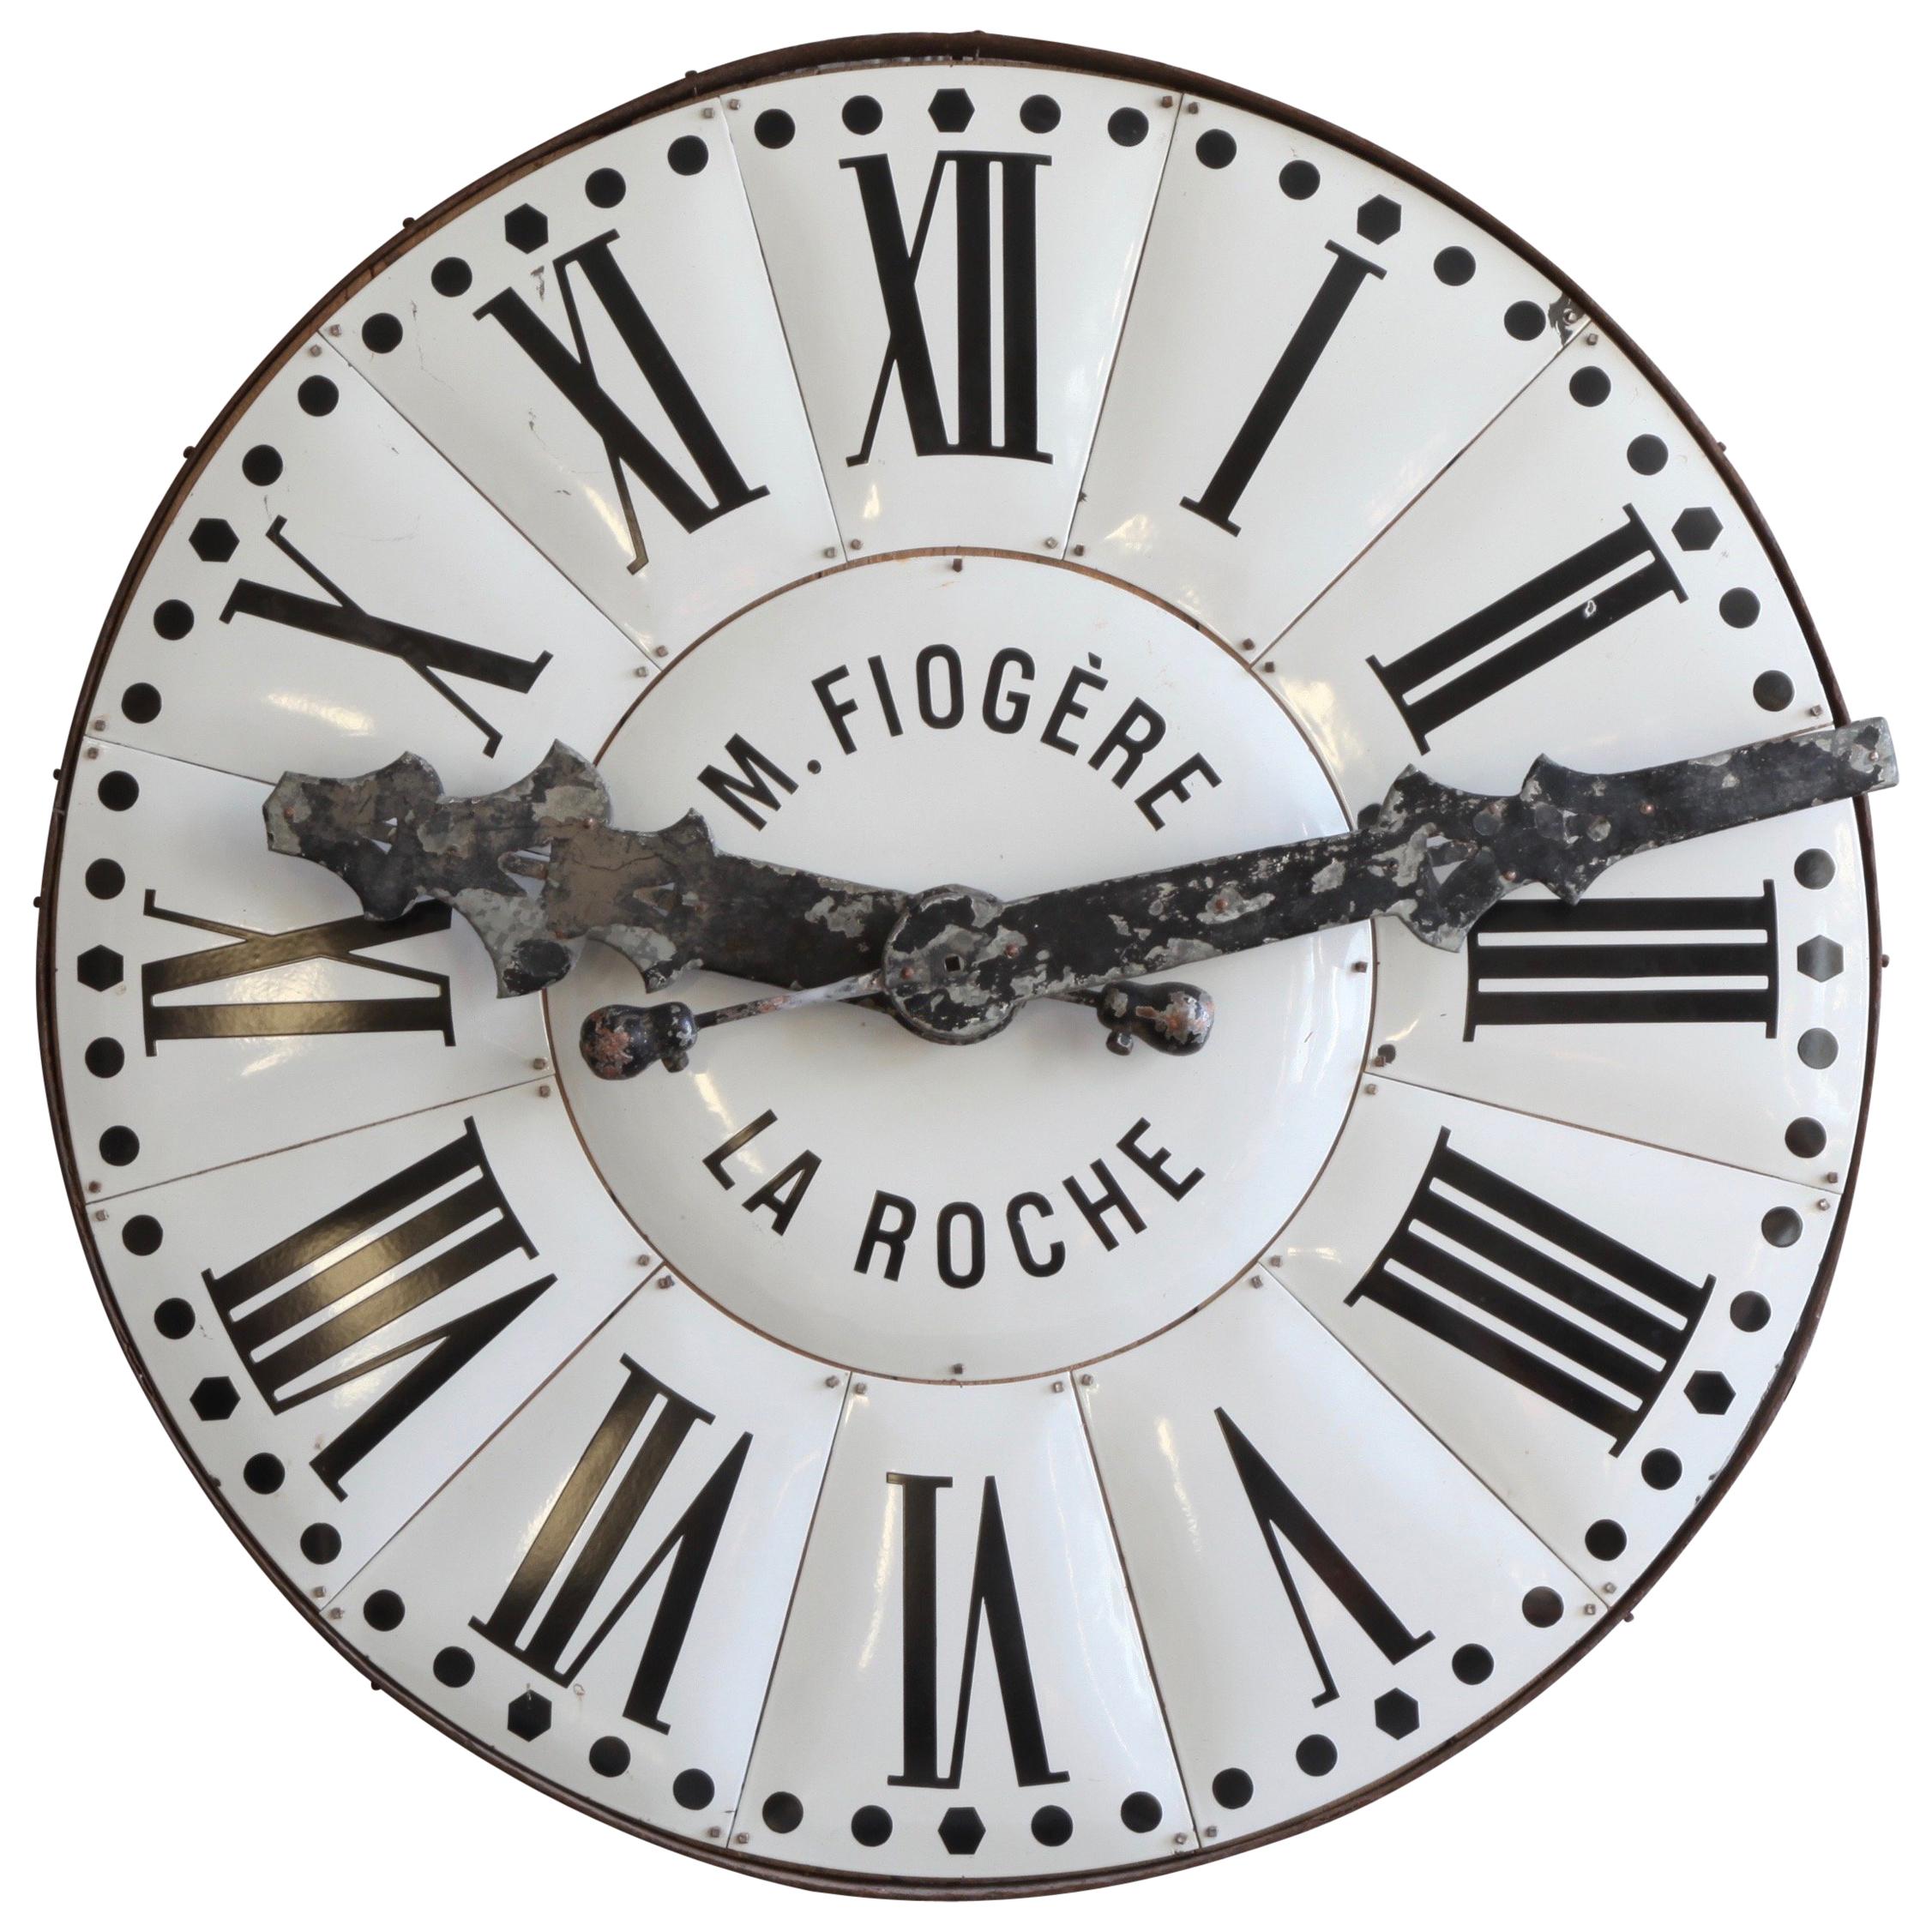 Large French Turn of the Century White Enamelled Clock Face from La Roche For Sale